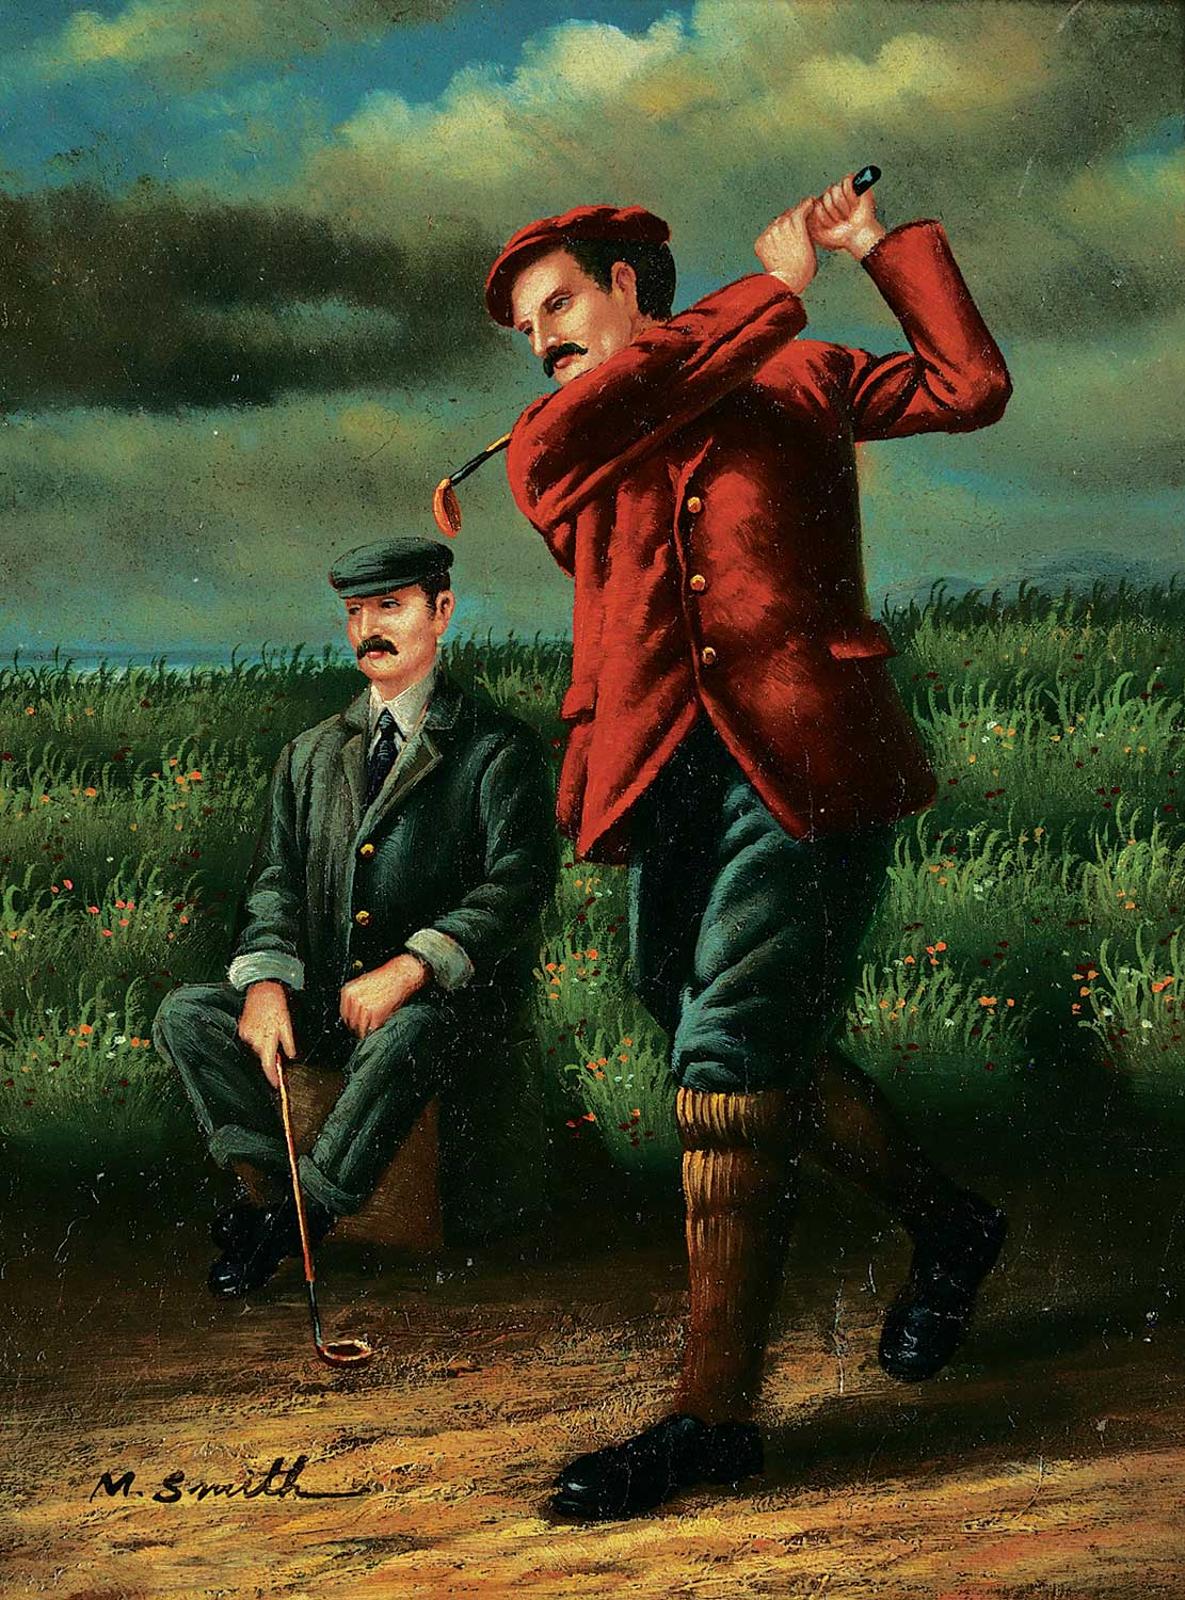 M. Smith - Untitled - The Golfers